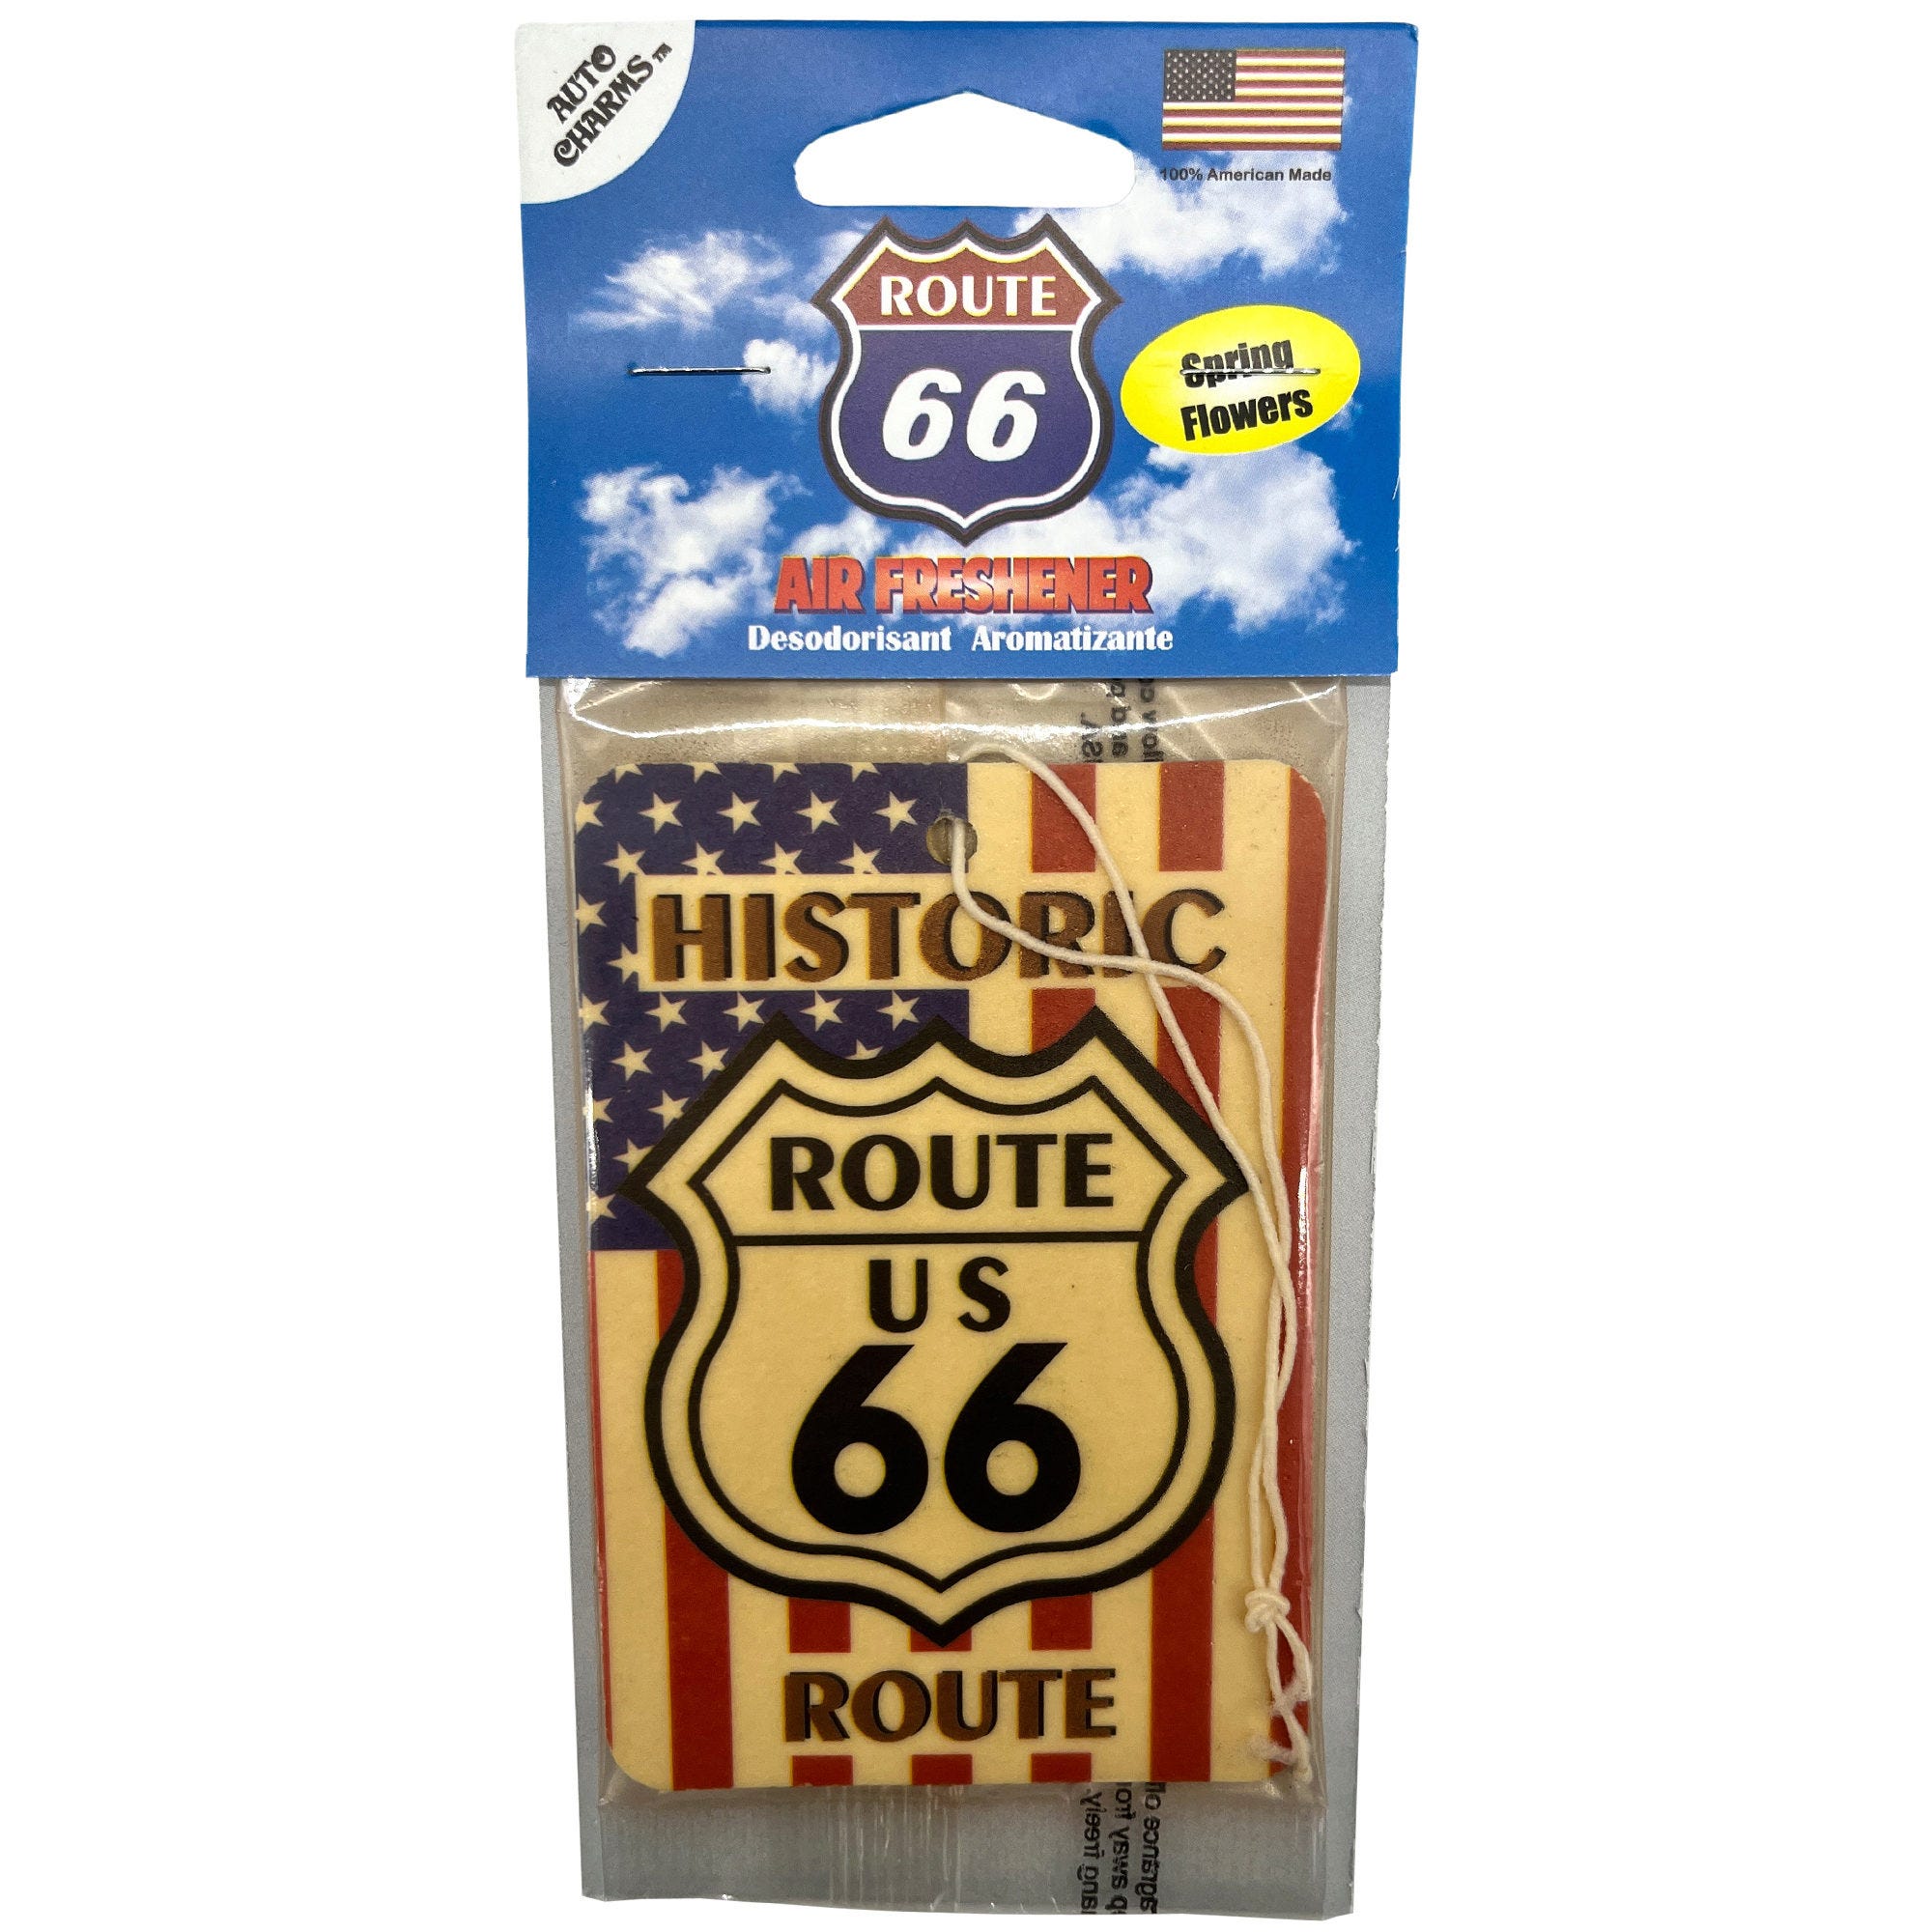 ROUTE 66 Air Freshener in Fresh Scent - Qty 60